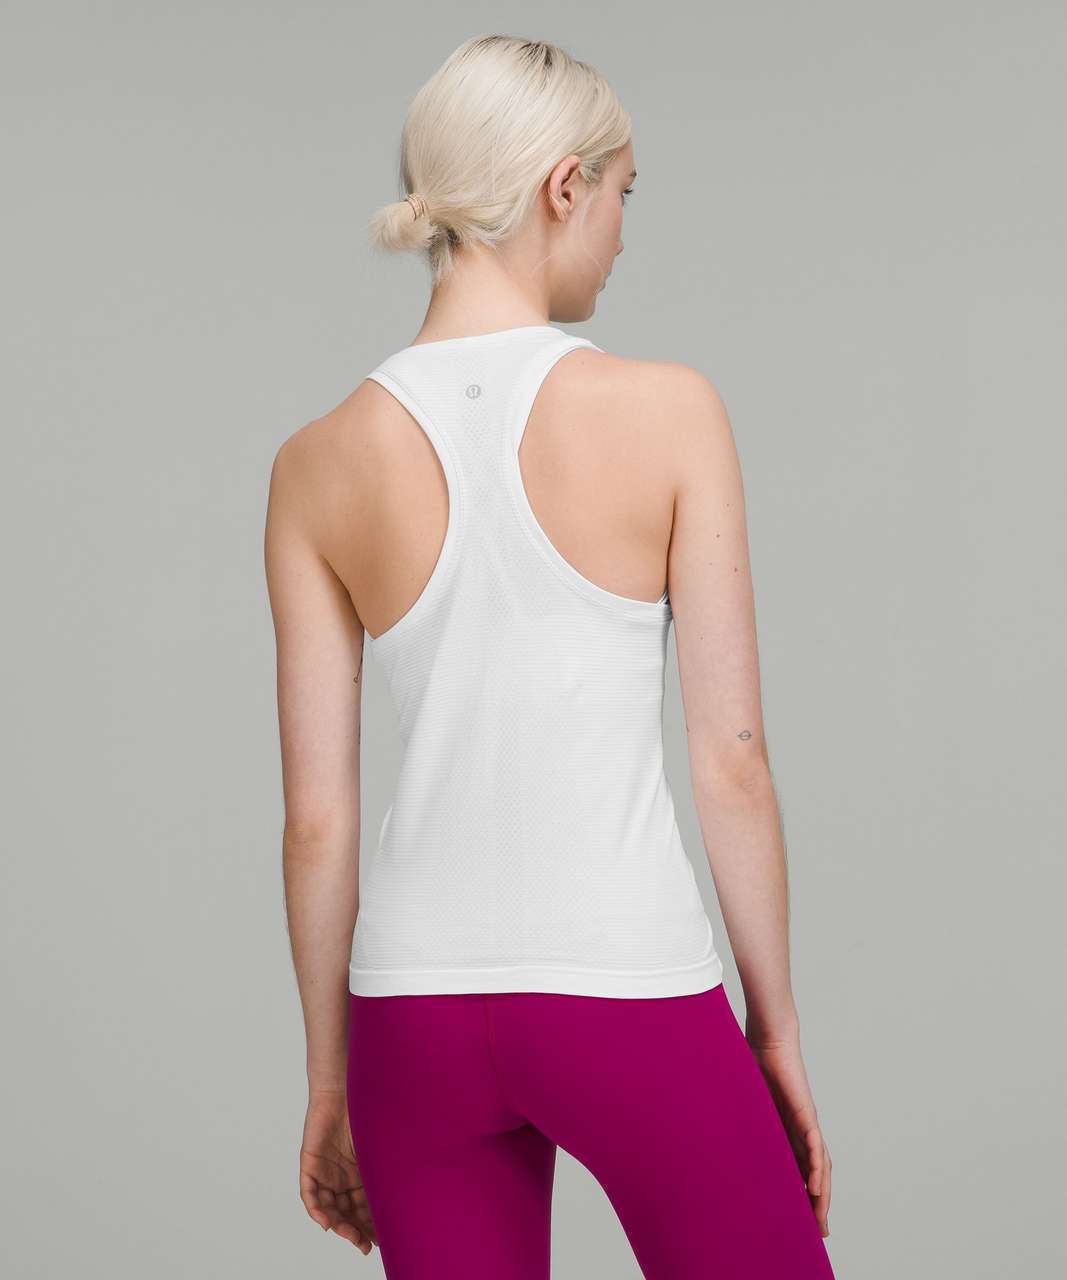 Lululemon Swiftly Tech High-Neck Tank Top 2.0 *Race Length - White / White (First Release)